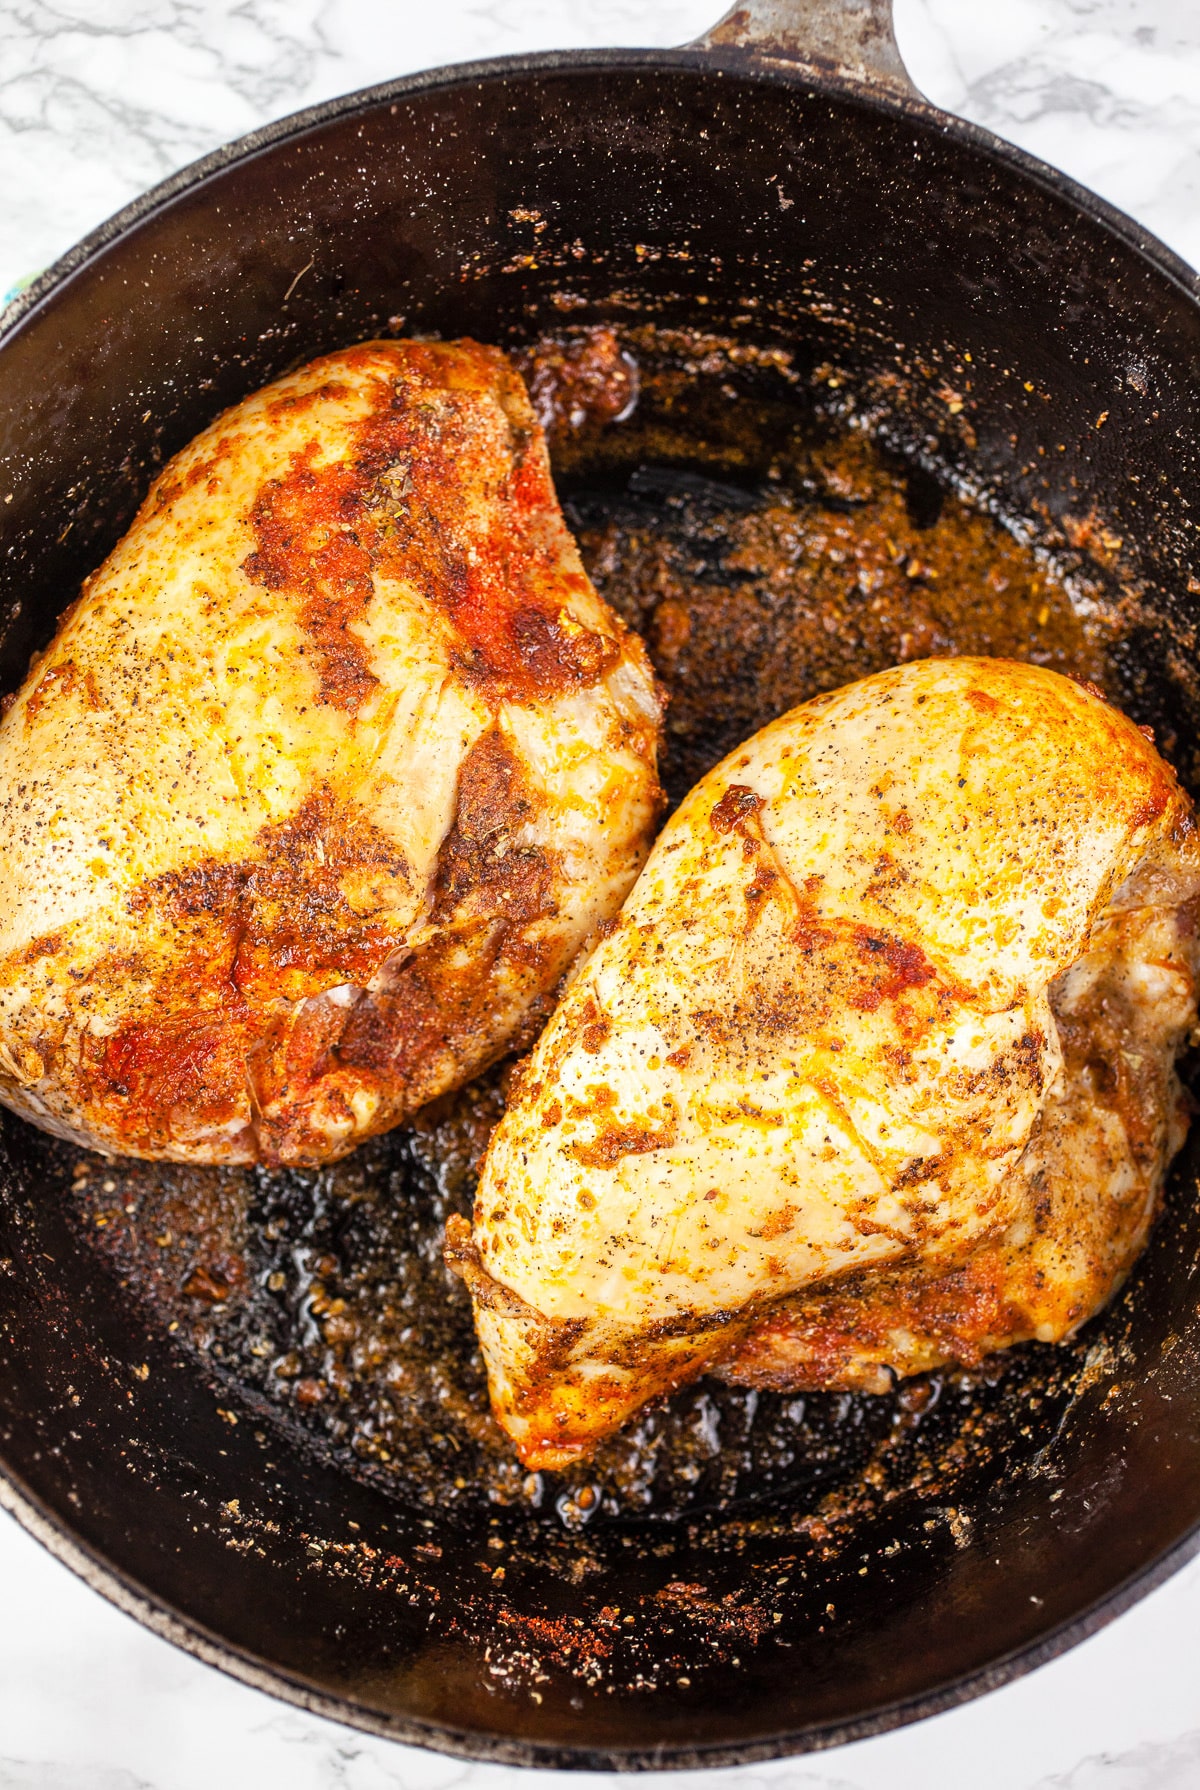 Split chicken breasts sautéed with spices in Dutch oven.